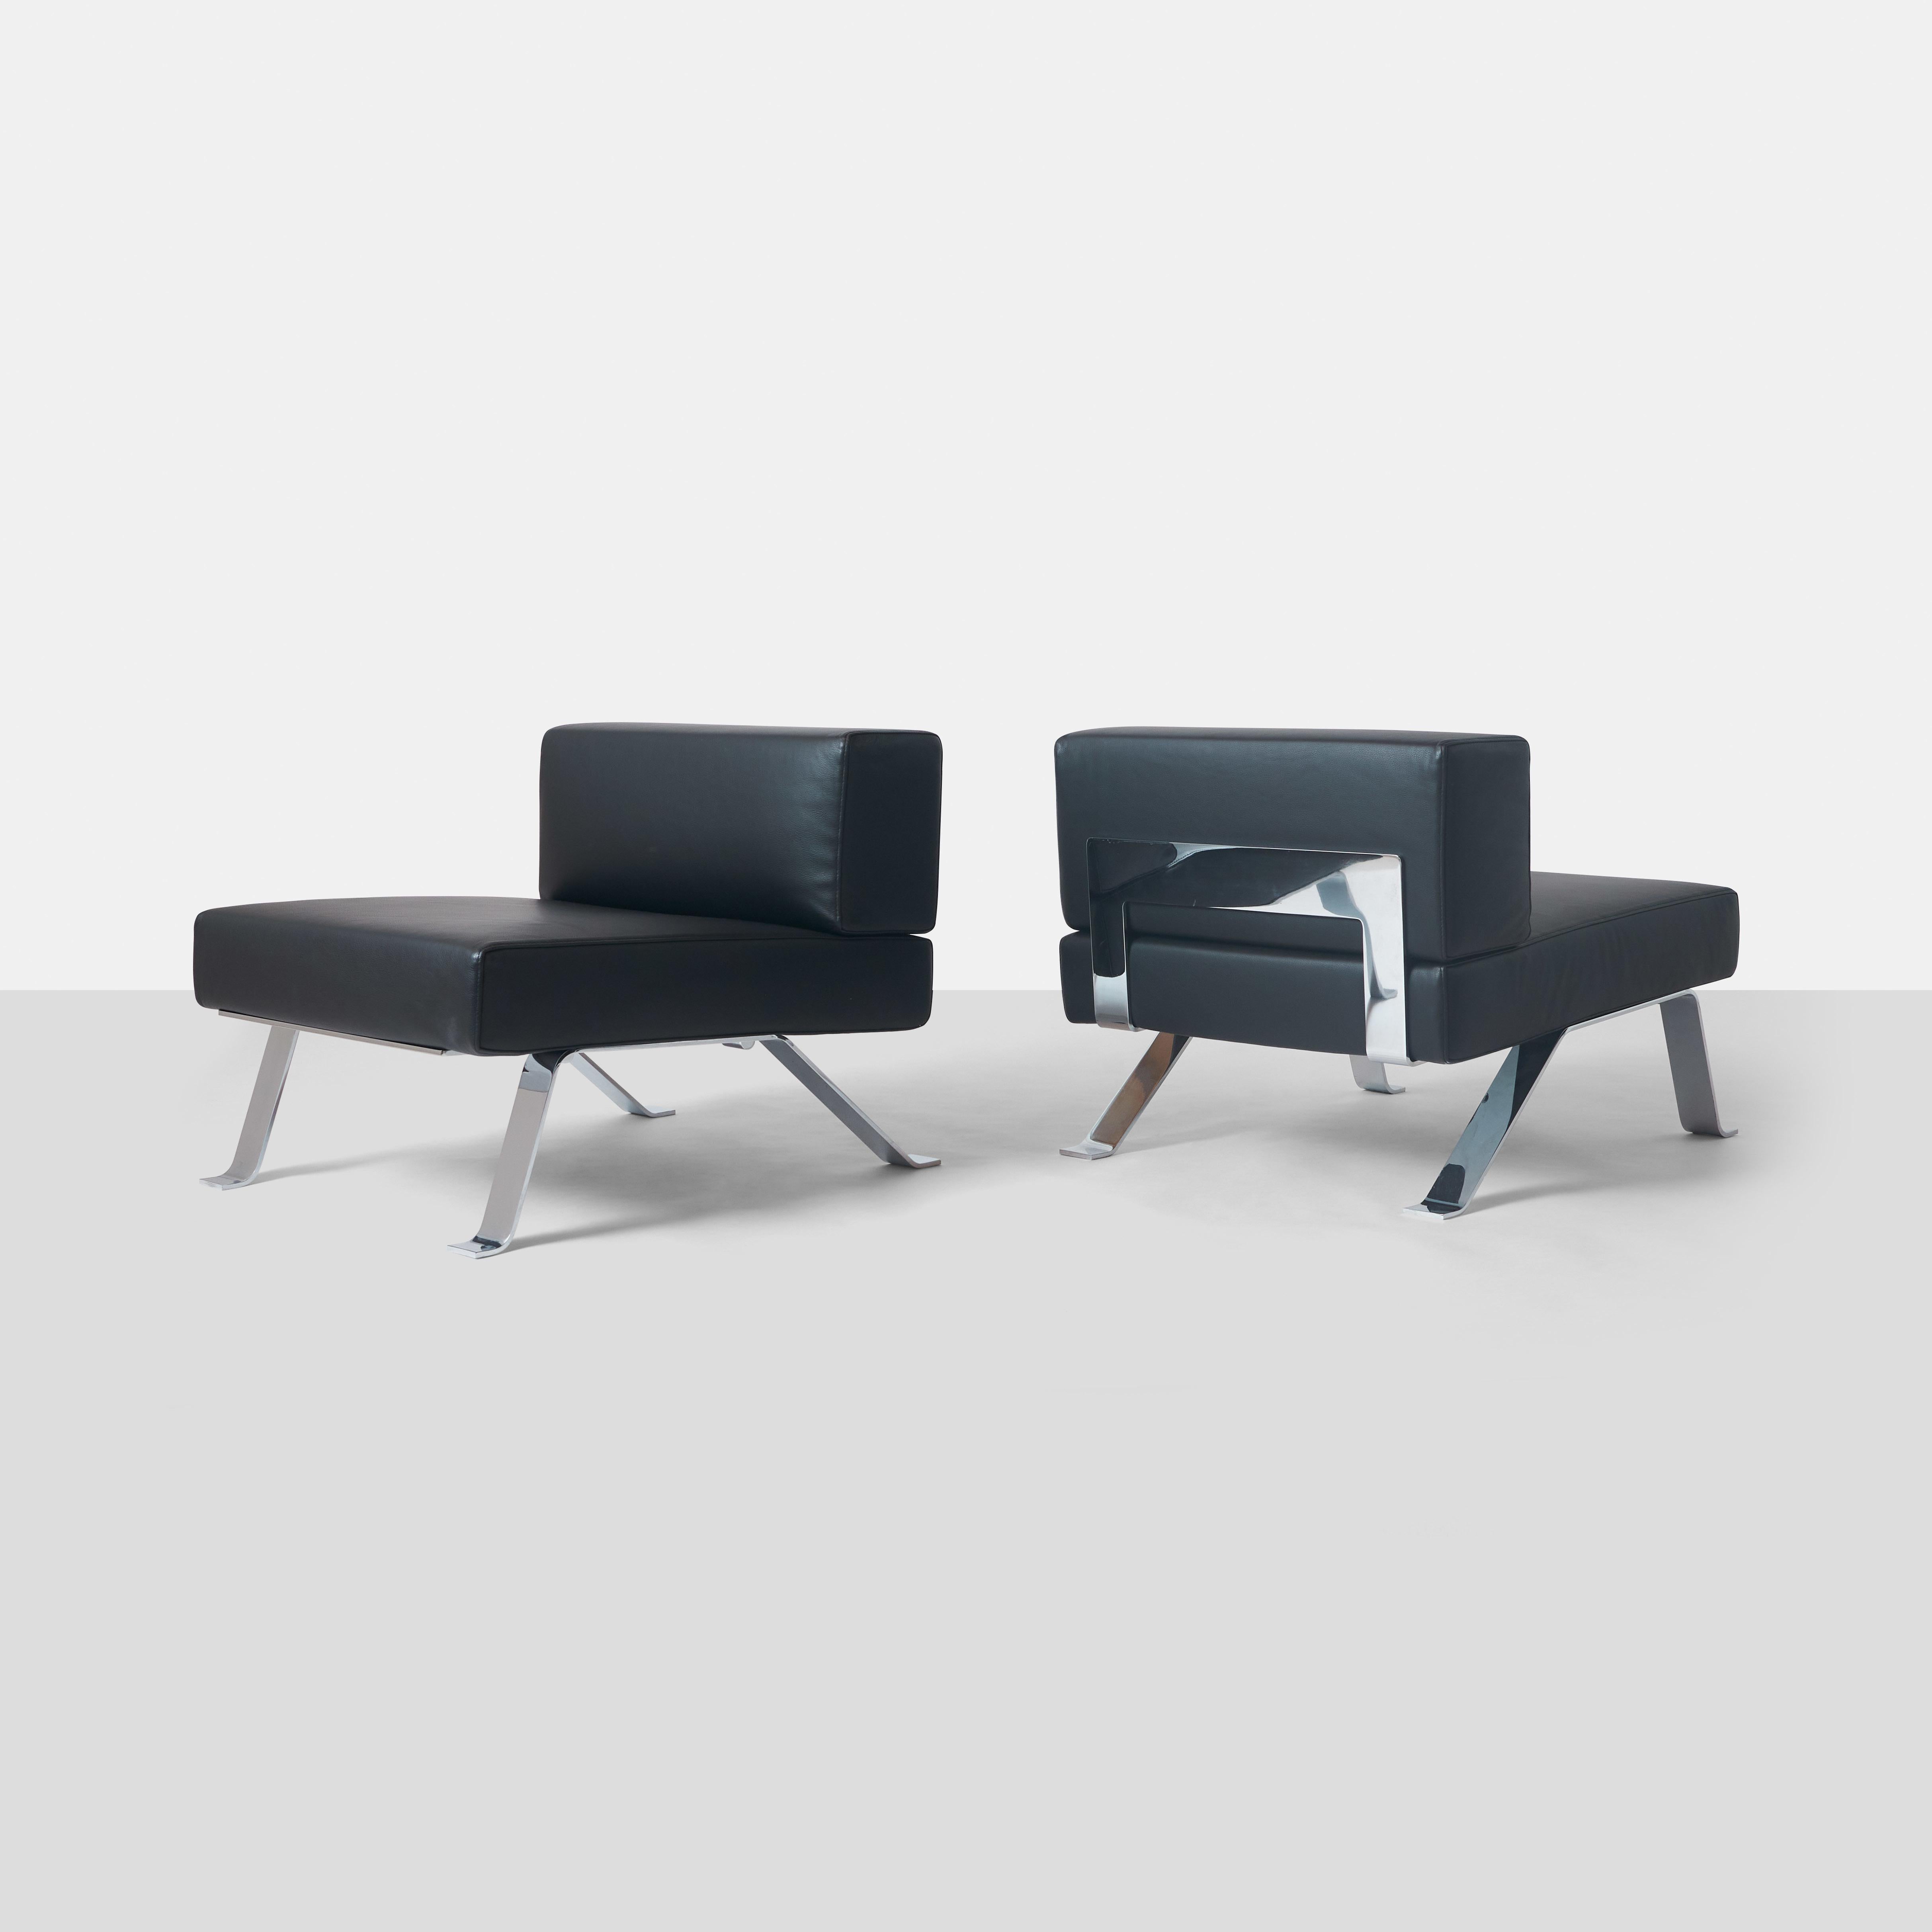 A pair of 512 Ombra lounge chairs by Charlotte Perriand for Cassina with chromed steel frames and black leather upholstery. 
Marked Charlotte Perriand Cassina Made in Italy on bottom.